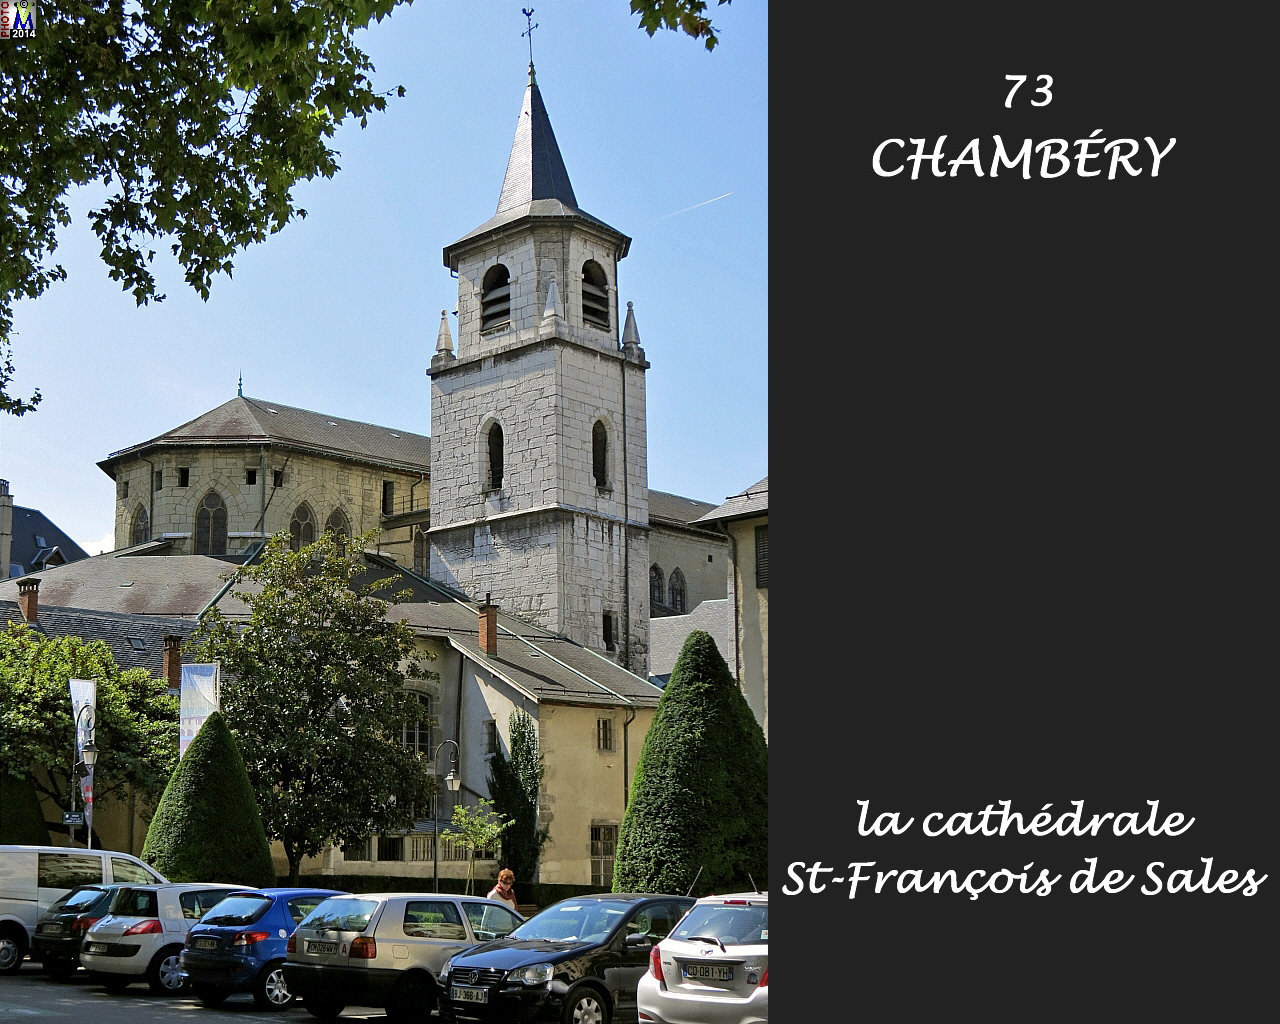 73CHAMBERY_cathedrale_108.jpg